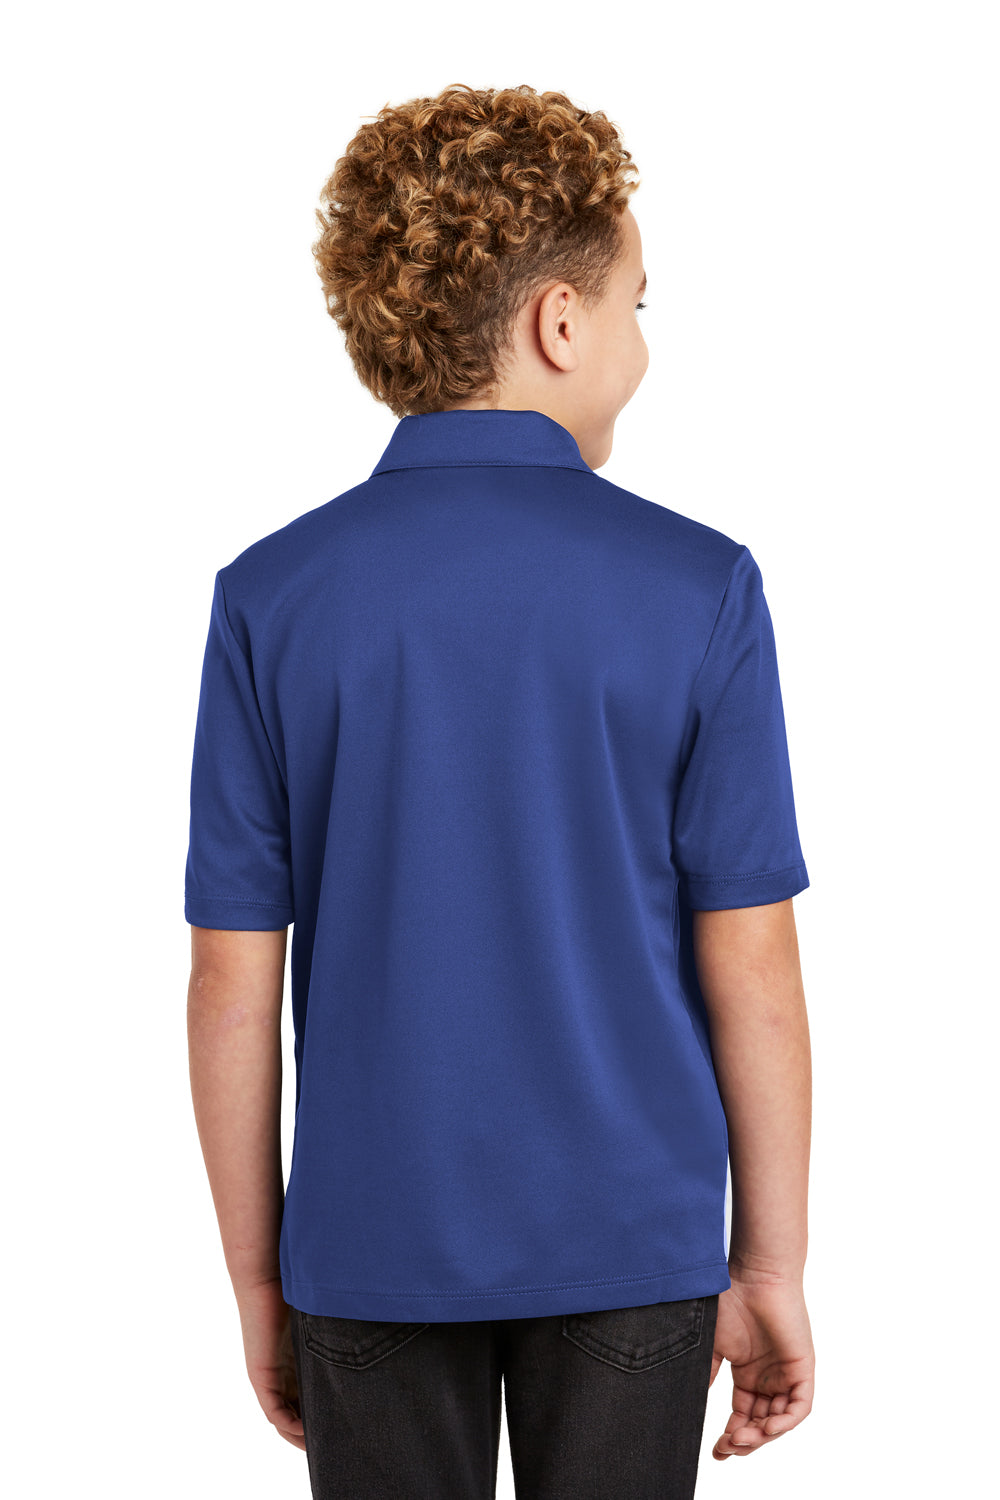 Port Authority Y540 Youth Silk Touch Performance Moisture Wicking Short Sleeve Polo Shirt Royal Blue Back